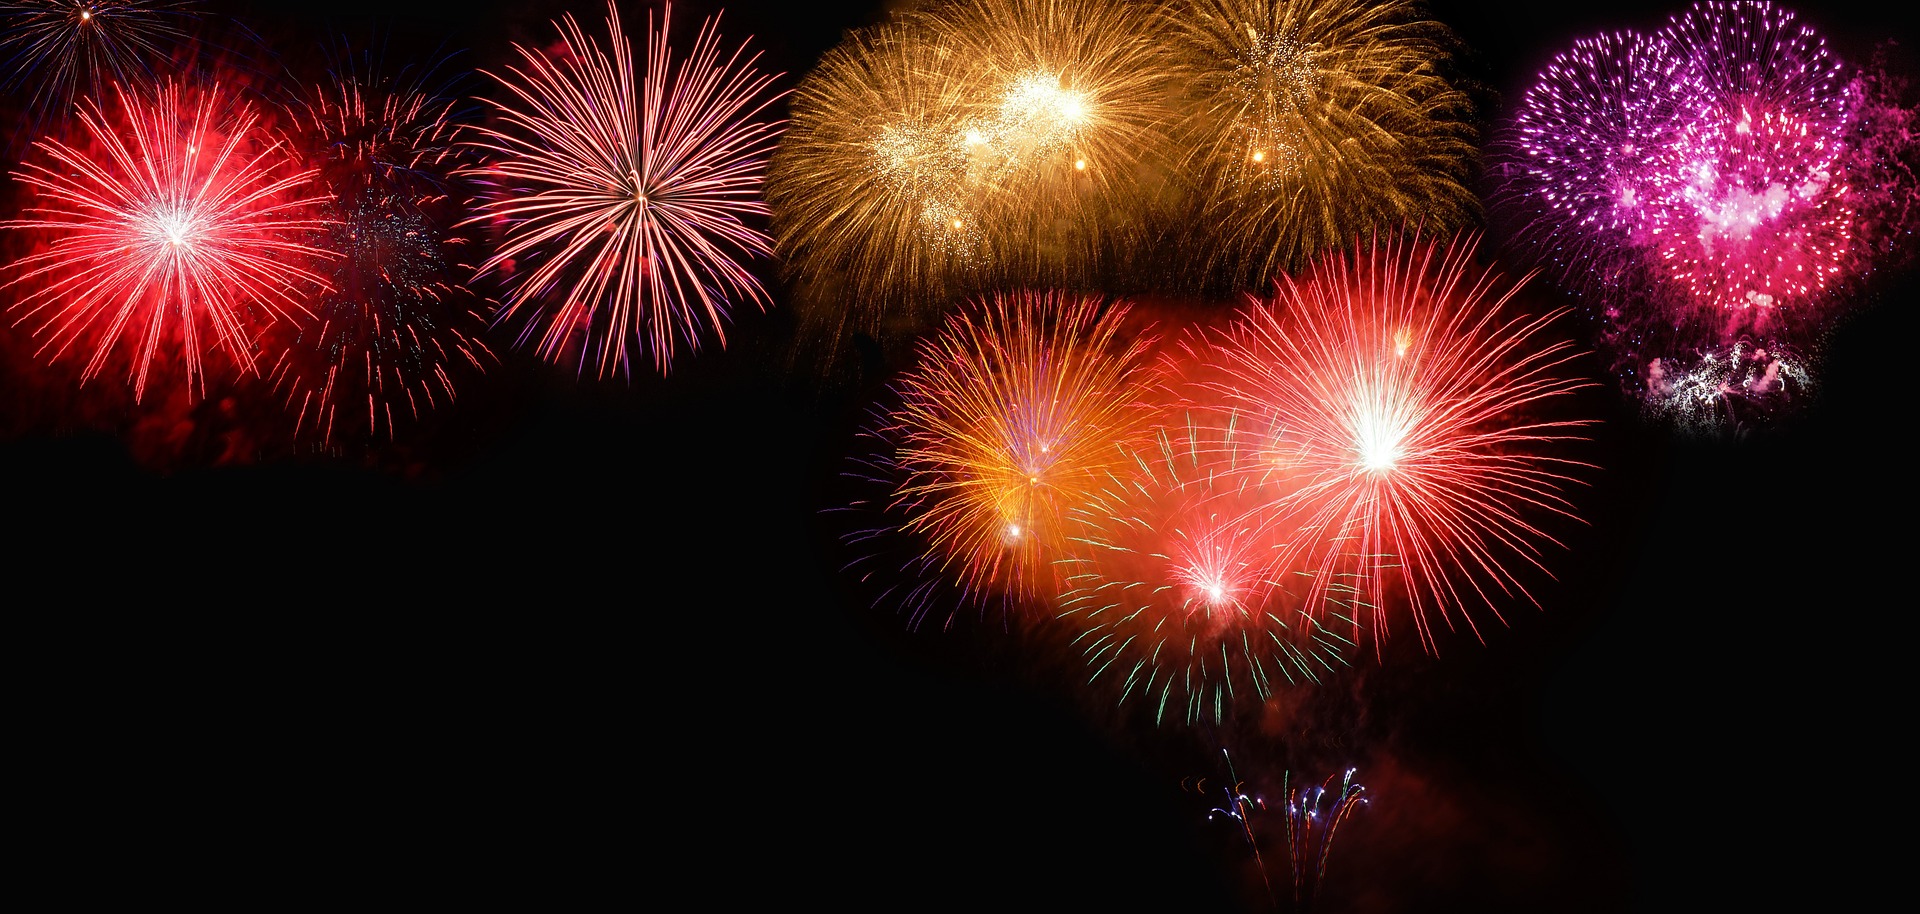 Top Five Places to Watch Fireworks in Rhode Island